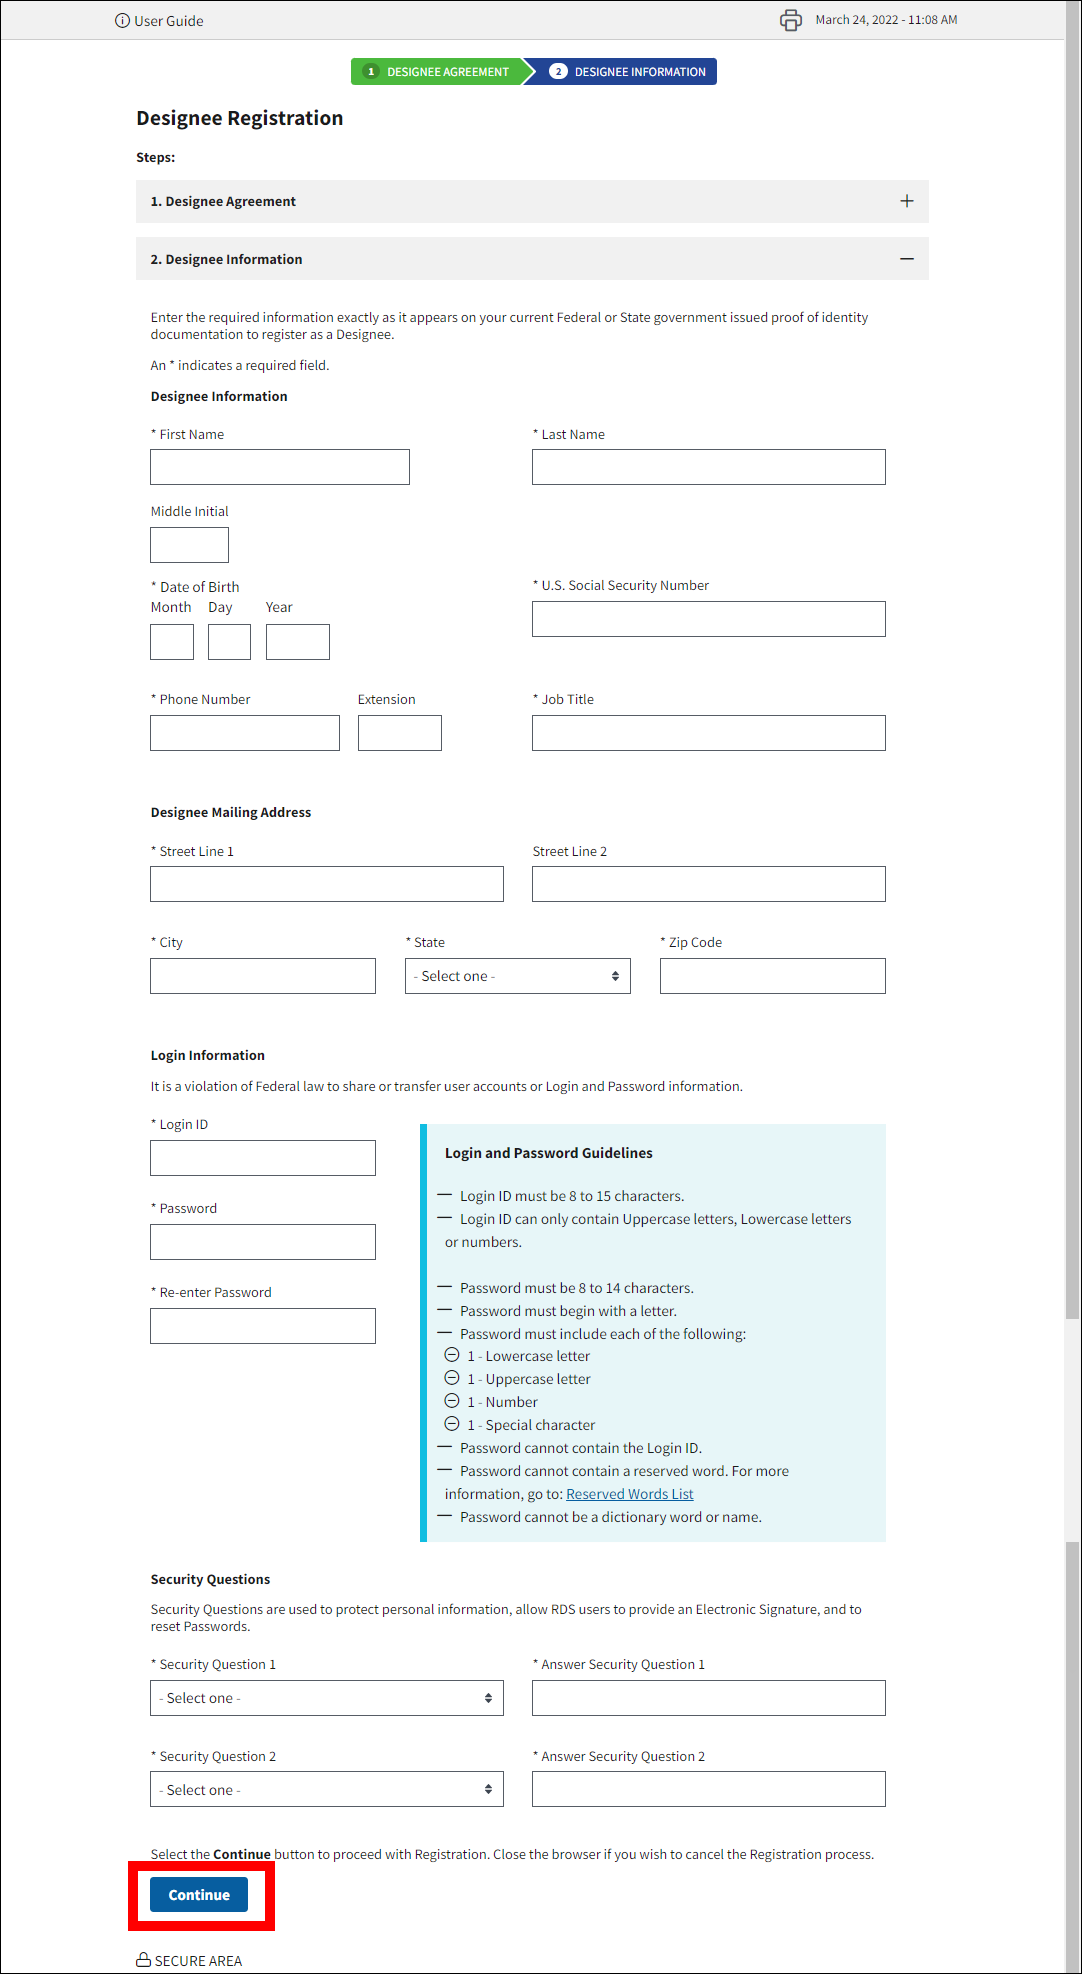 Designee Registration page with Continue button highlighted.